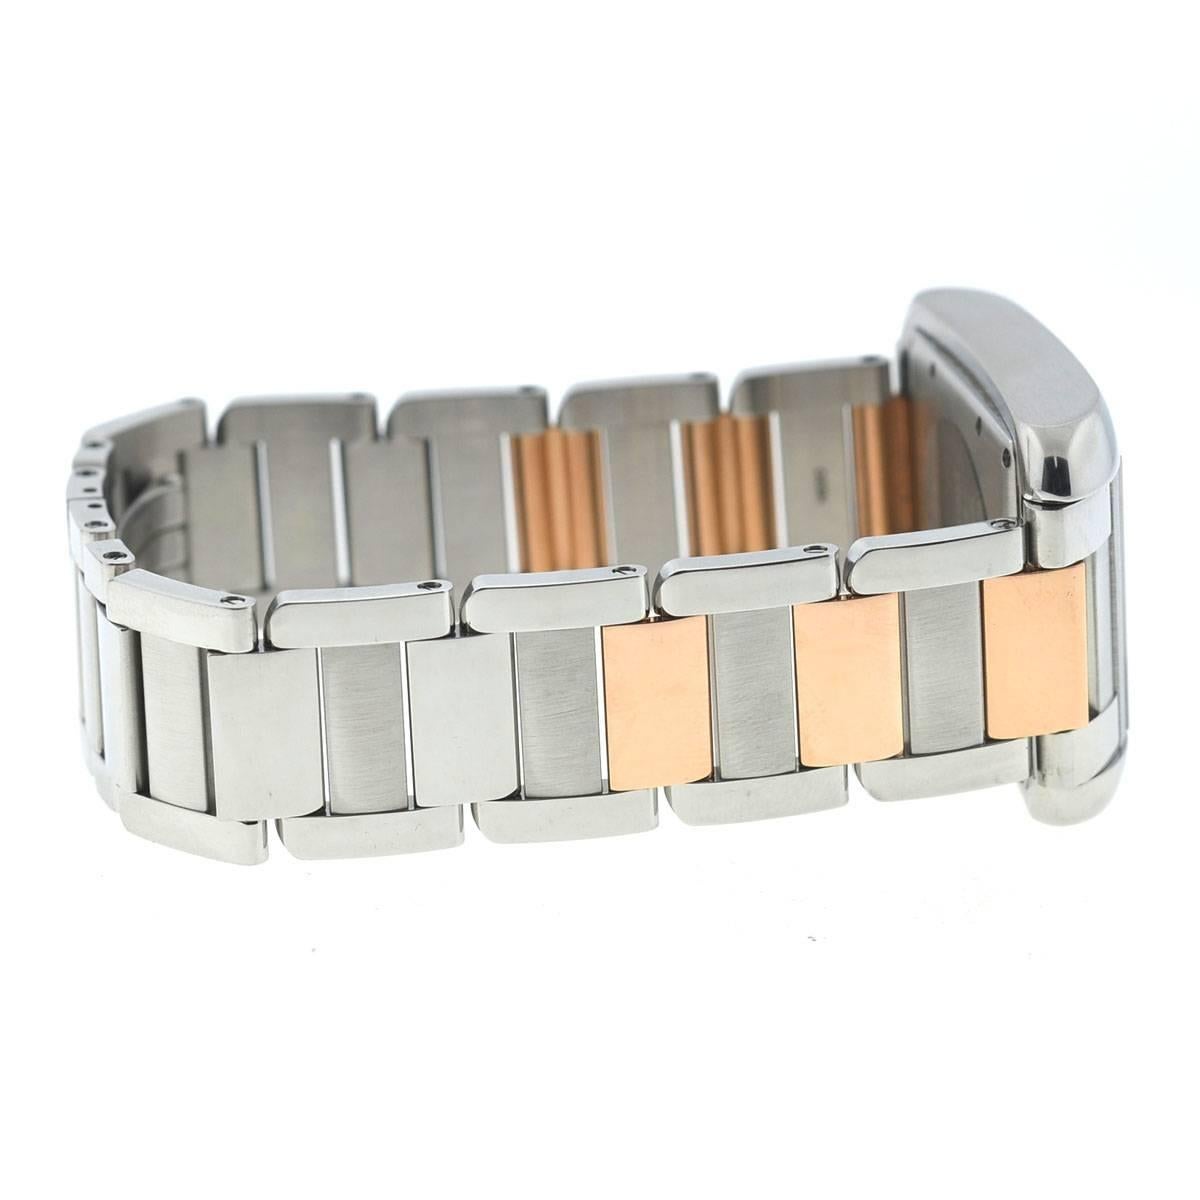 Women's Cartier Two-Tone 3511 Anglaise Stainless Steel 18 Karat Rose Gold Watch